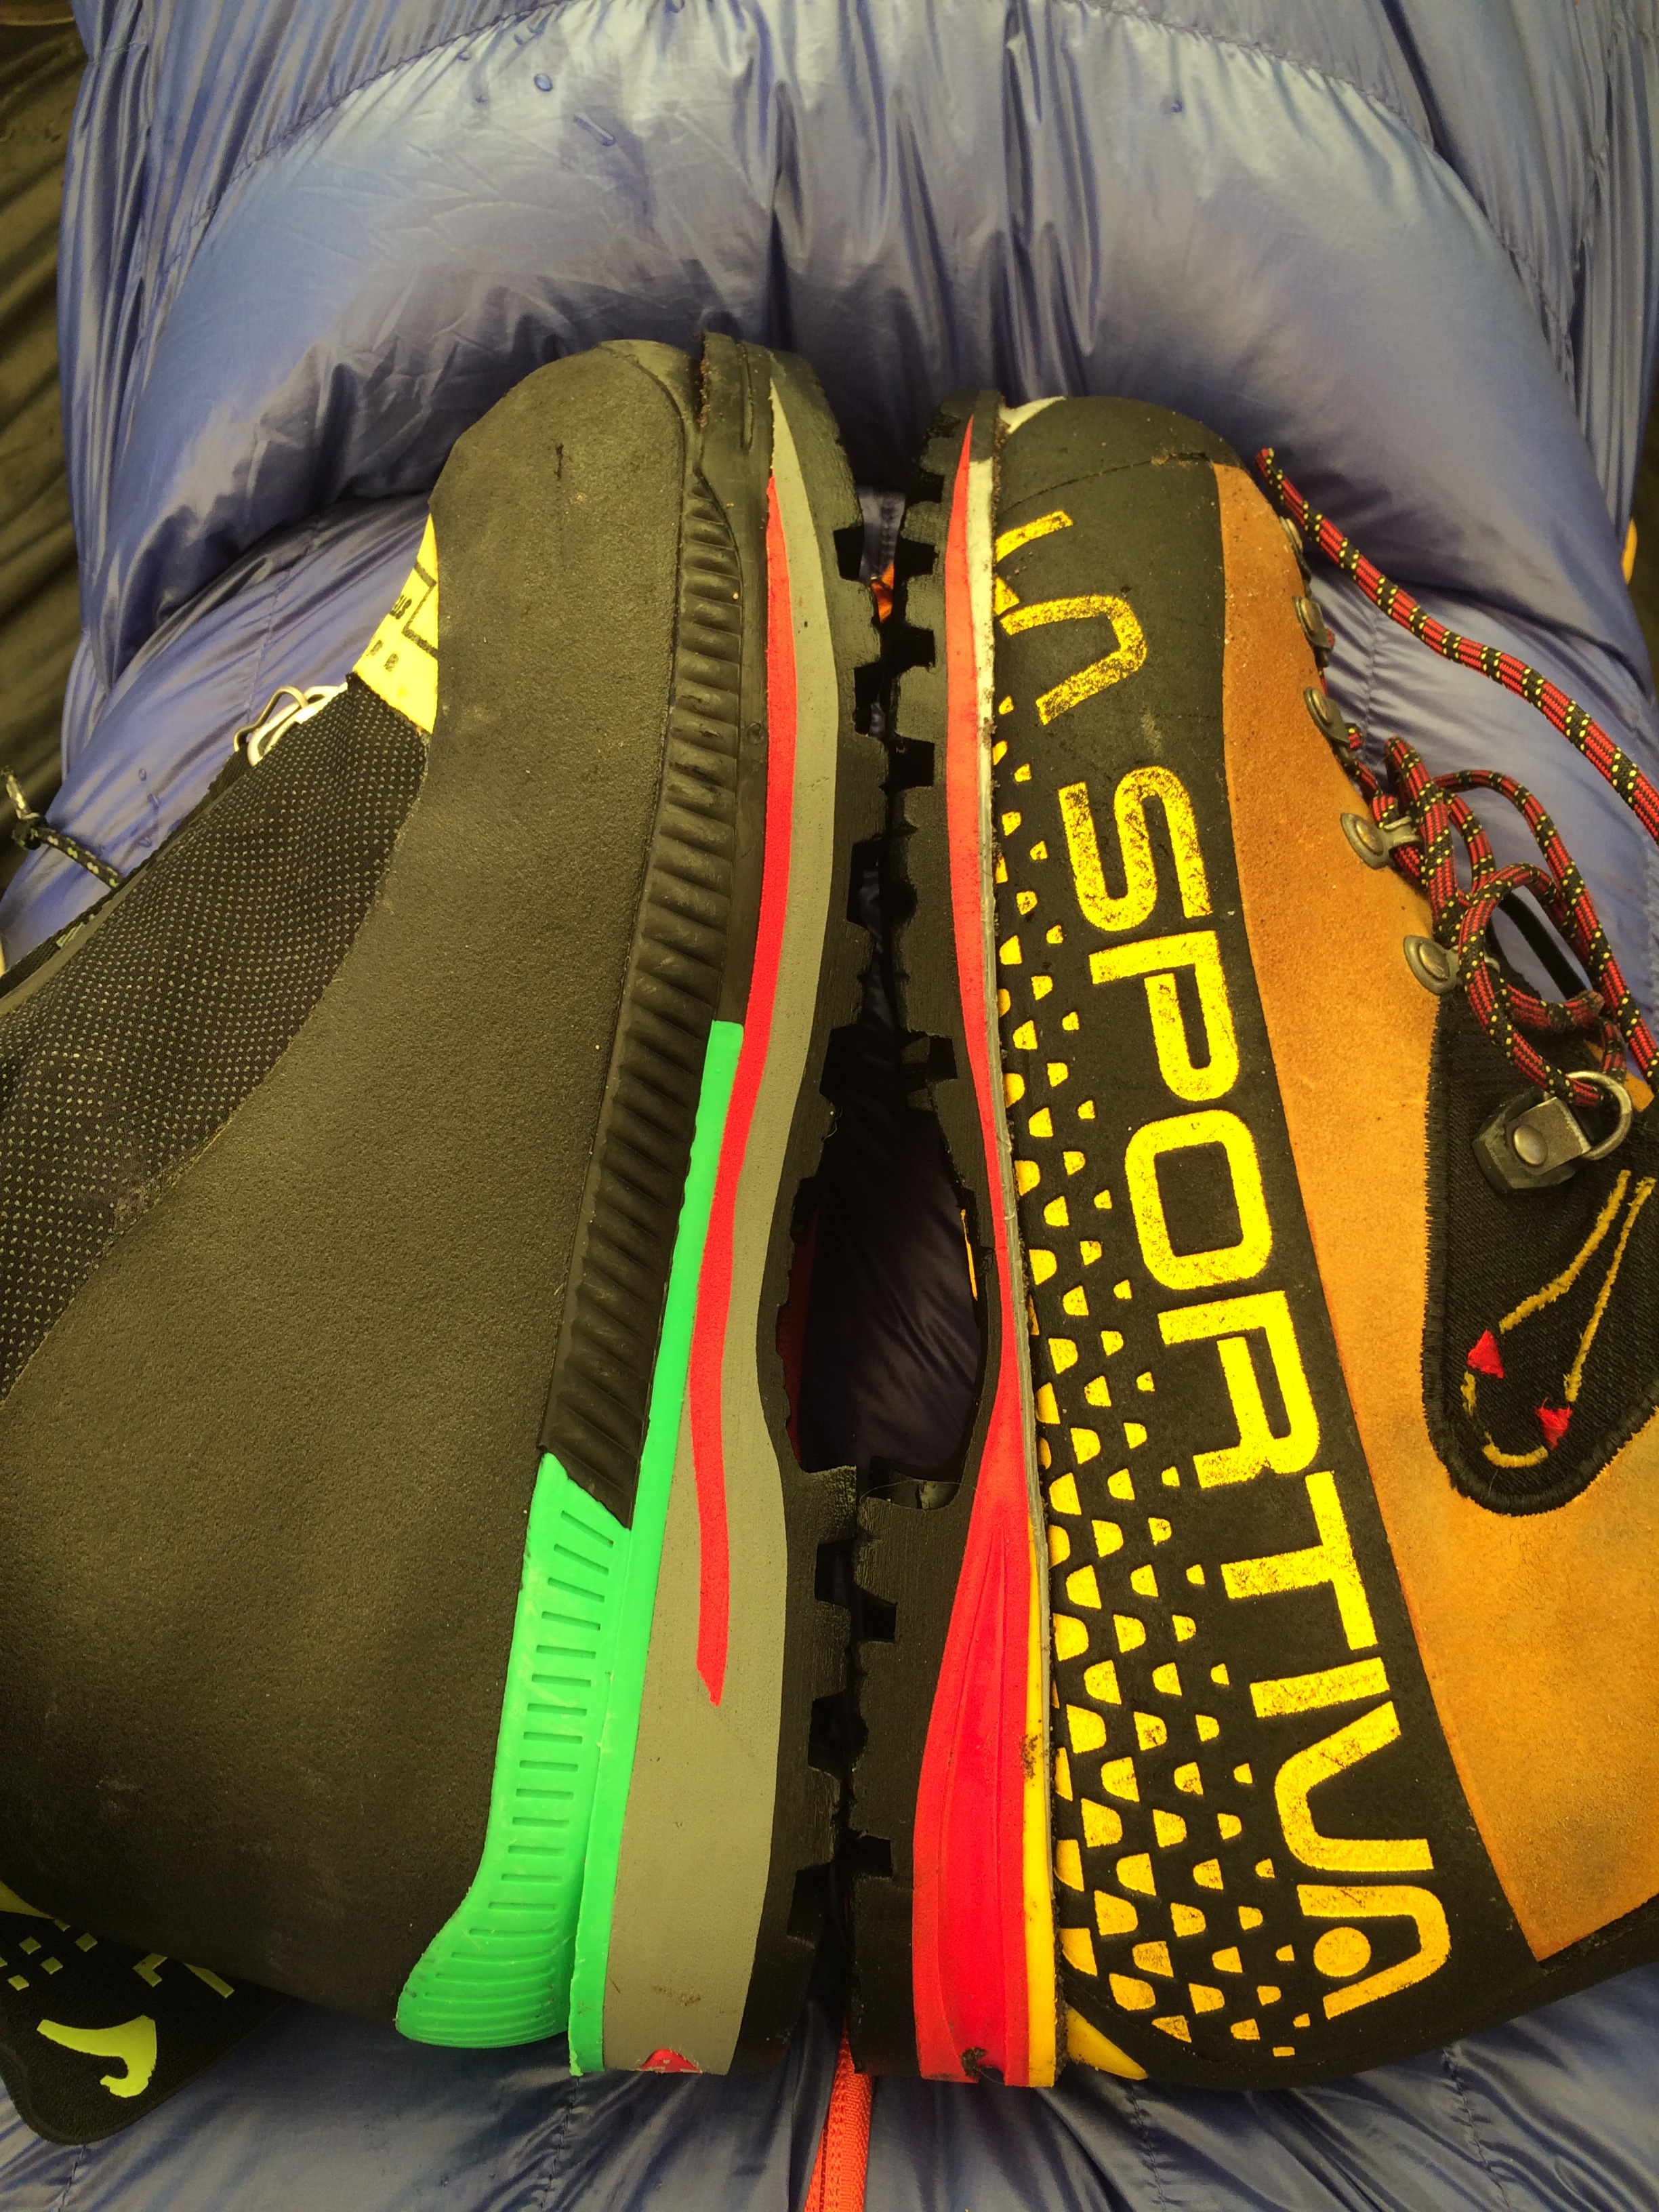 The sole length of the Stetind (left), which fits an American size 9.5 foot, compares to the length of the La Sportiva Nepal Cube, which fits a size 11.5. [Photo] Mike Lewis collection